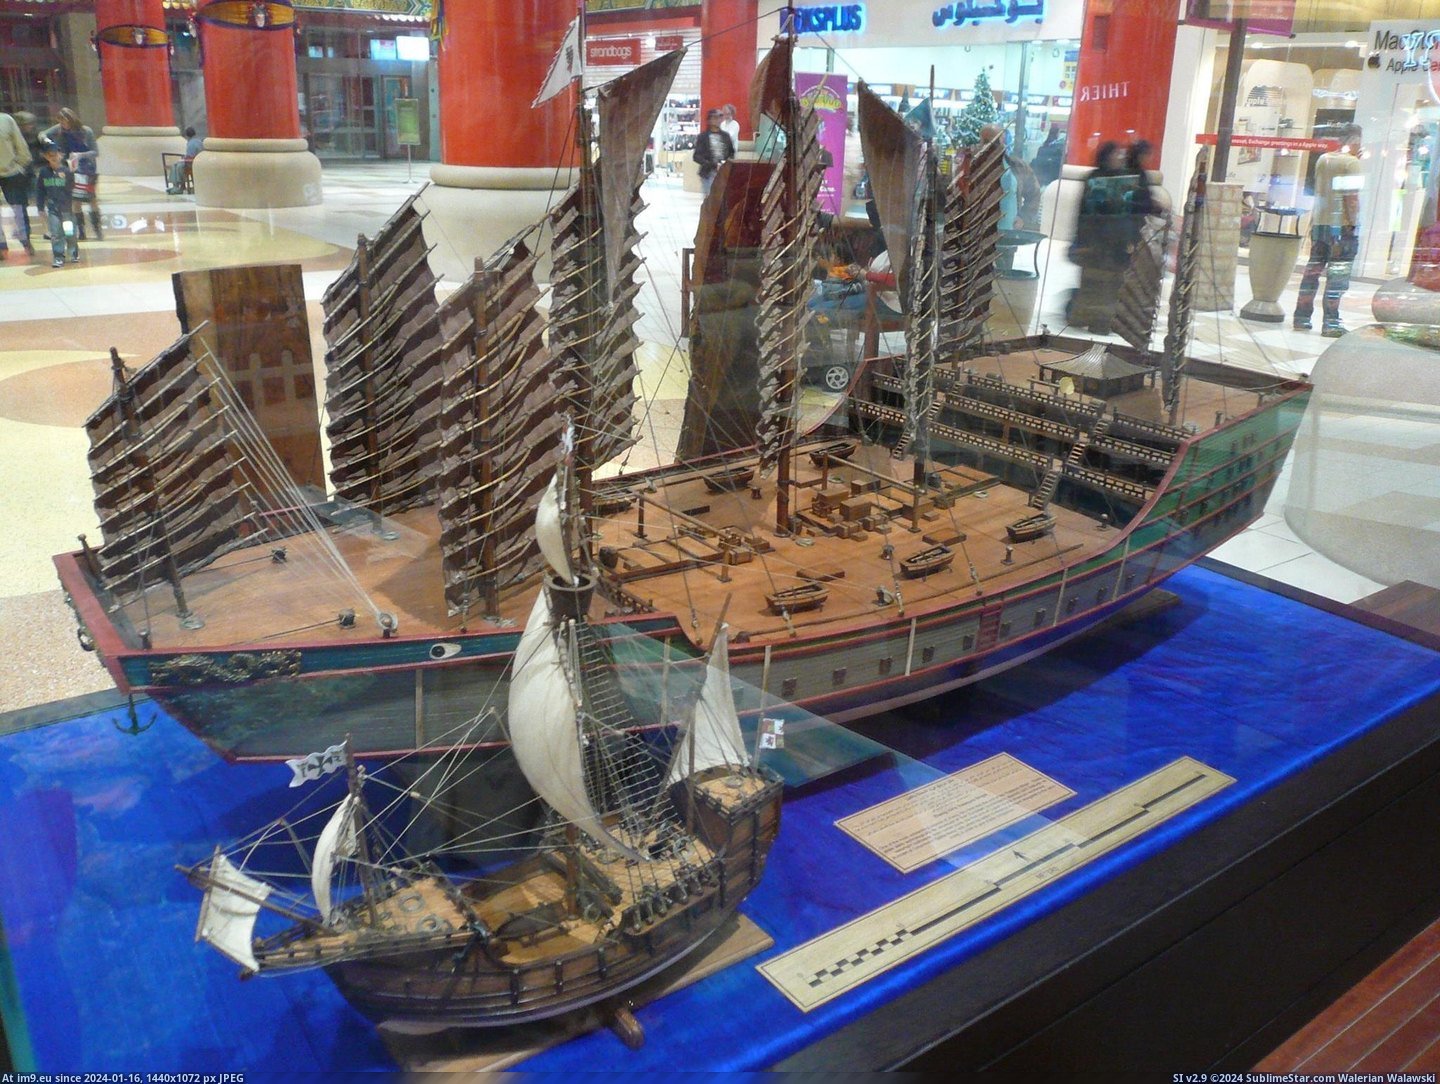 #Time #Santa #Chinese #Lived #Explorer #Christopher #Maria #Ship #Compared [Pics] Chinese explorer Zheng He's ship compared to Christopher Columbus' Santa Maria. Both lived and sailed at the same time. Pic. (Obraz z album My r/PICS favs))